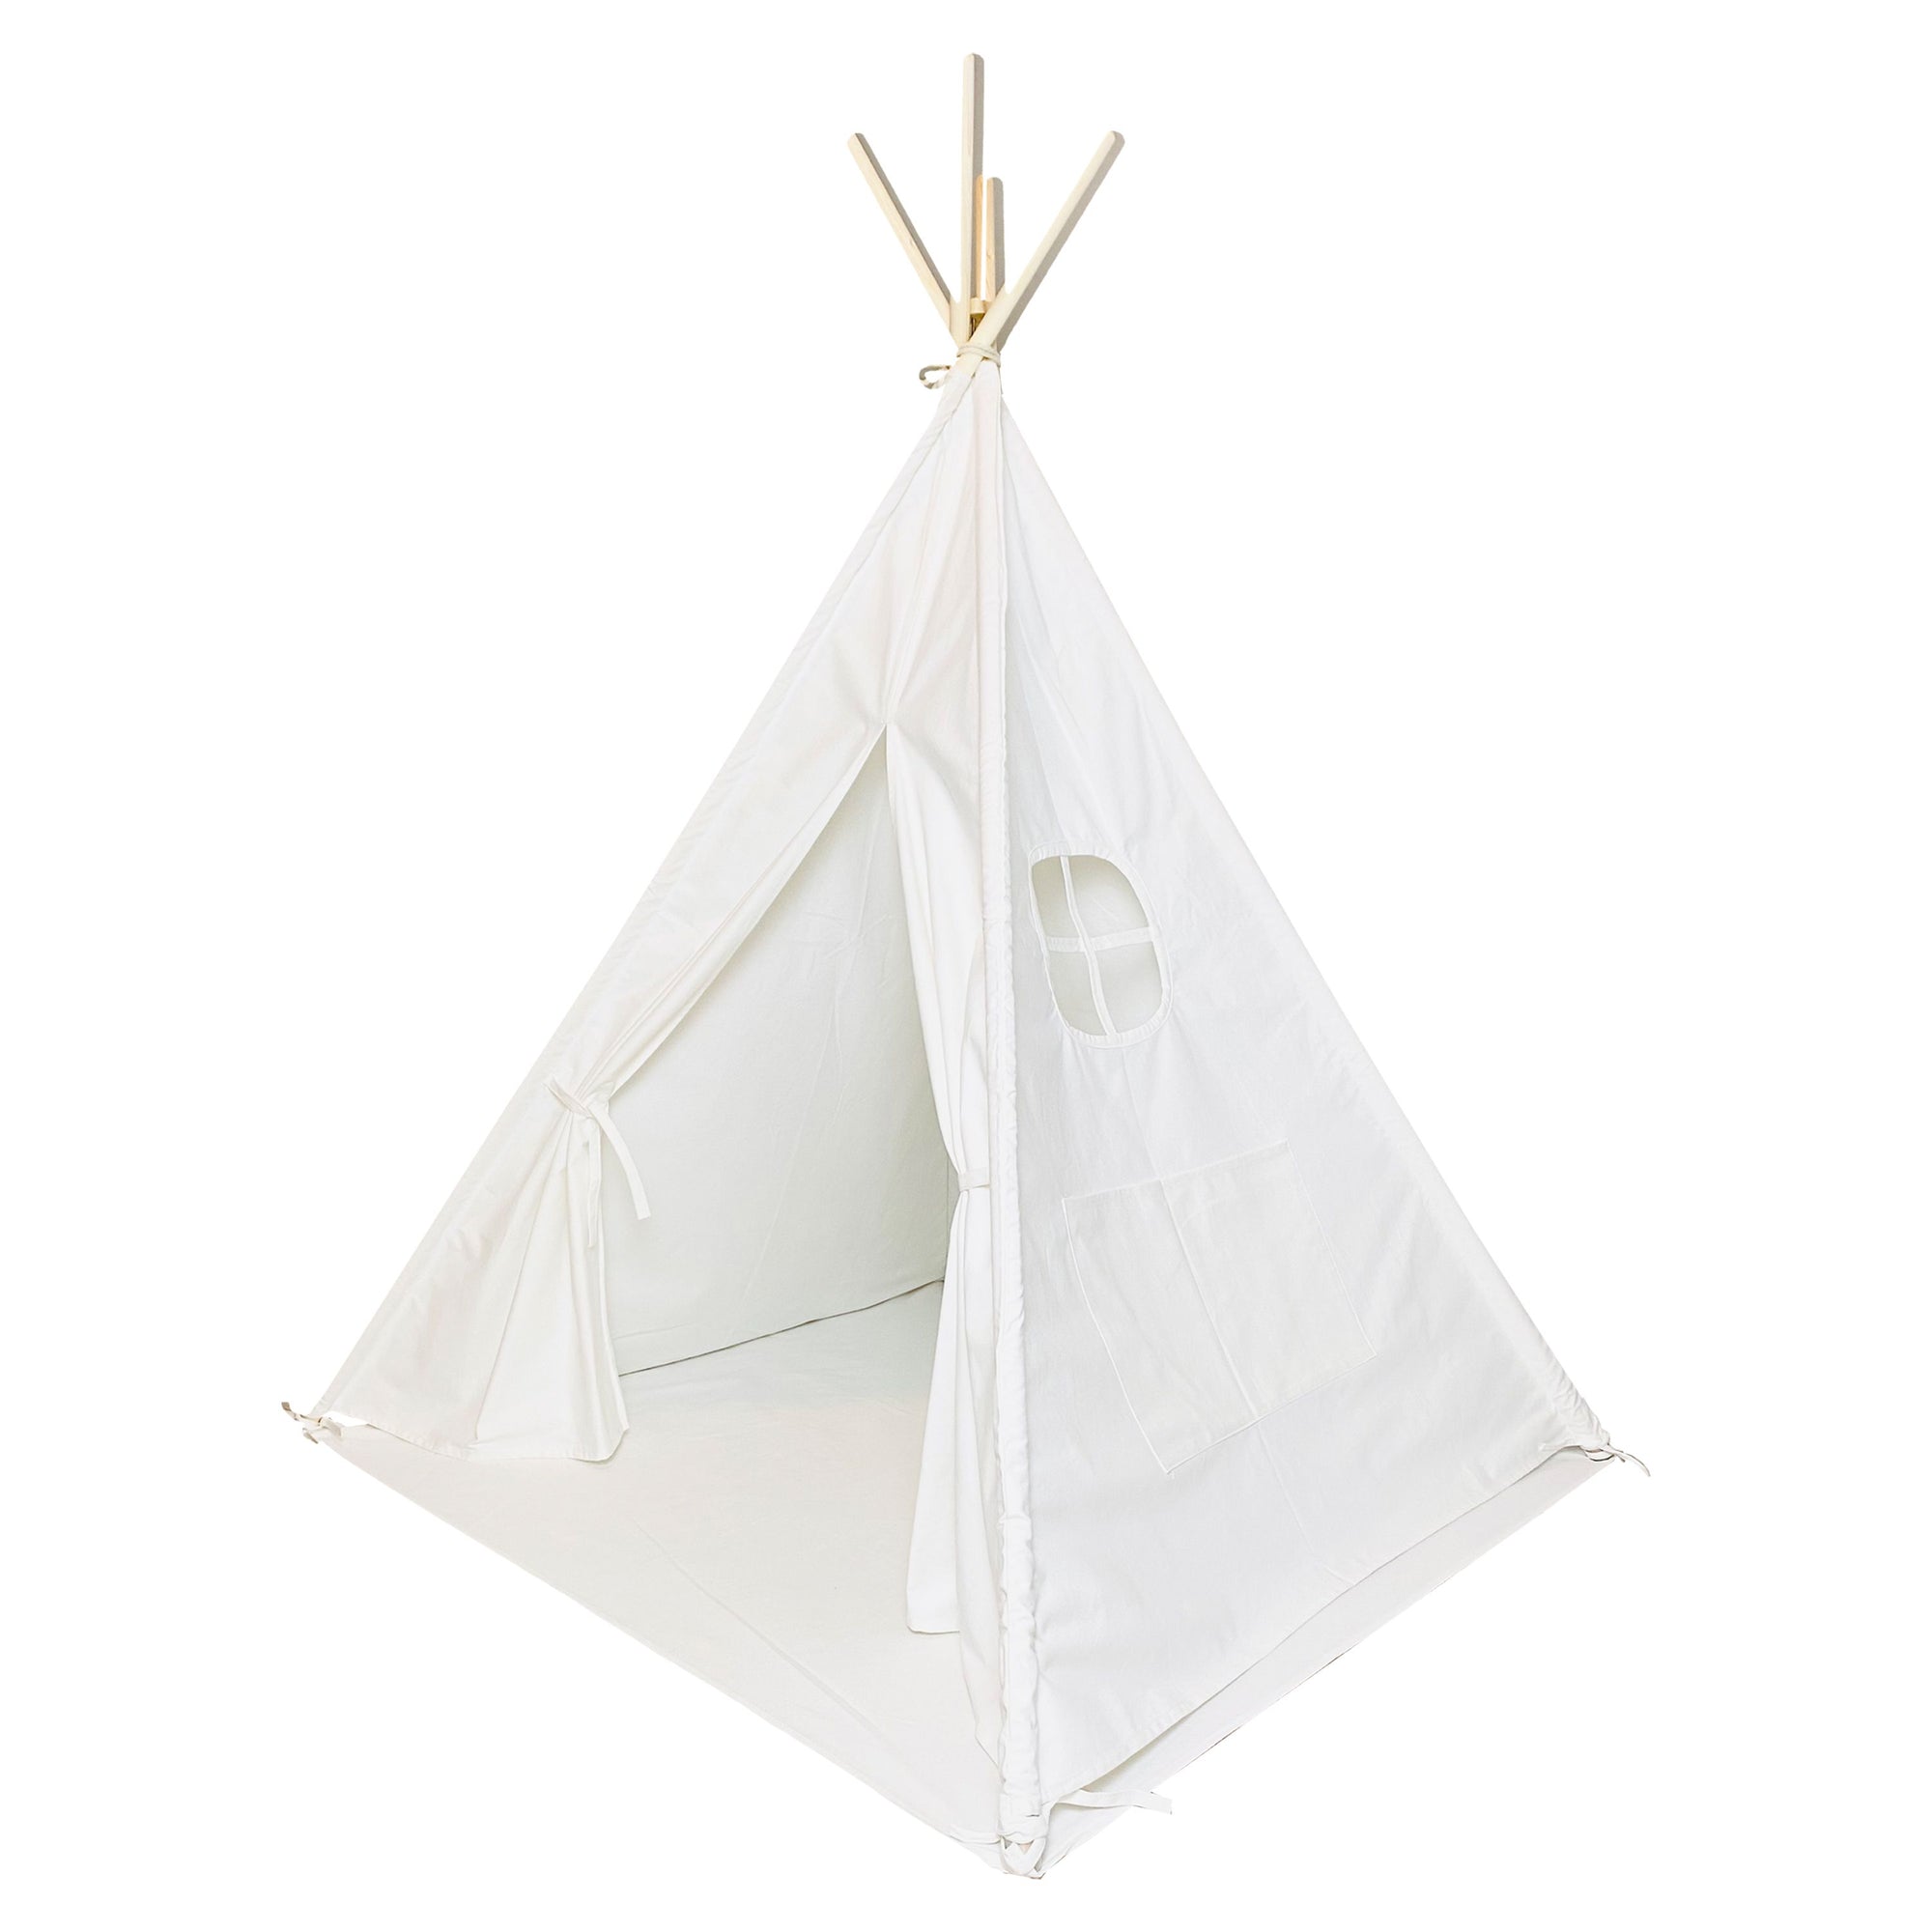 Pop Up Play Teepee Tent For Kids And Toddlers